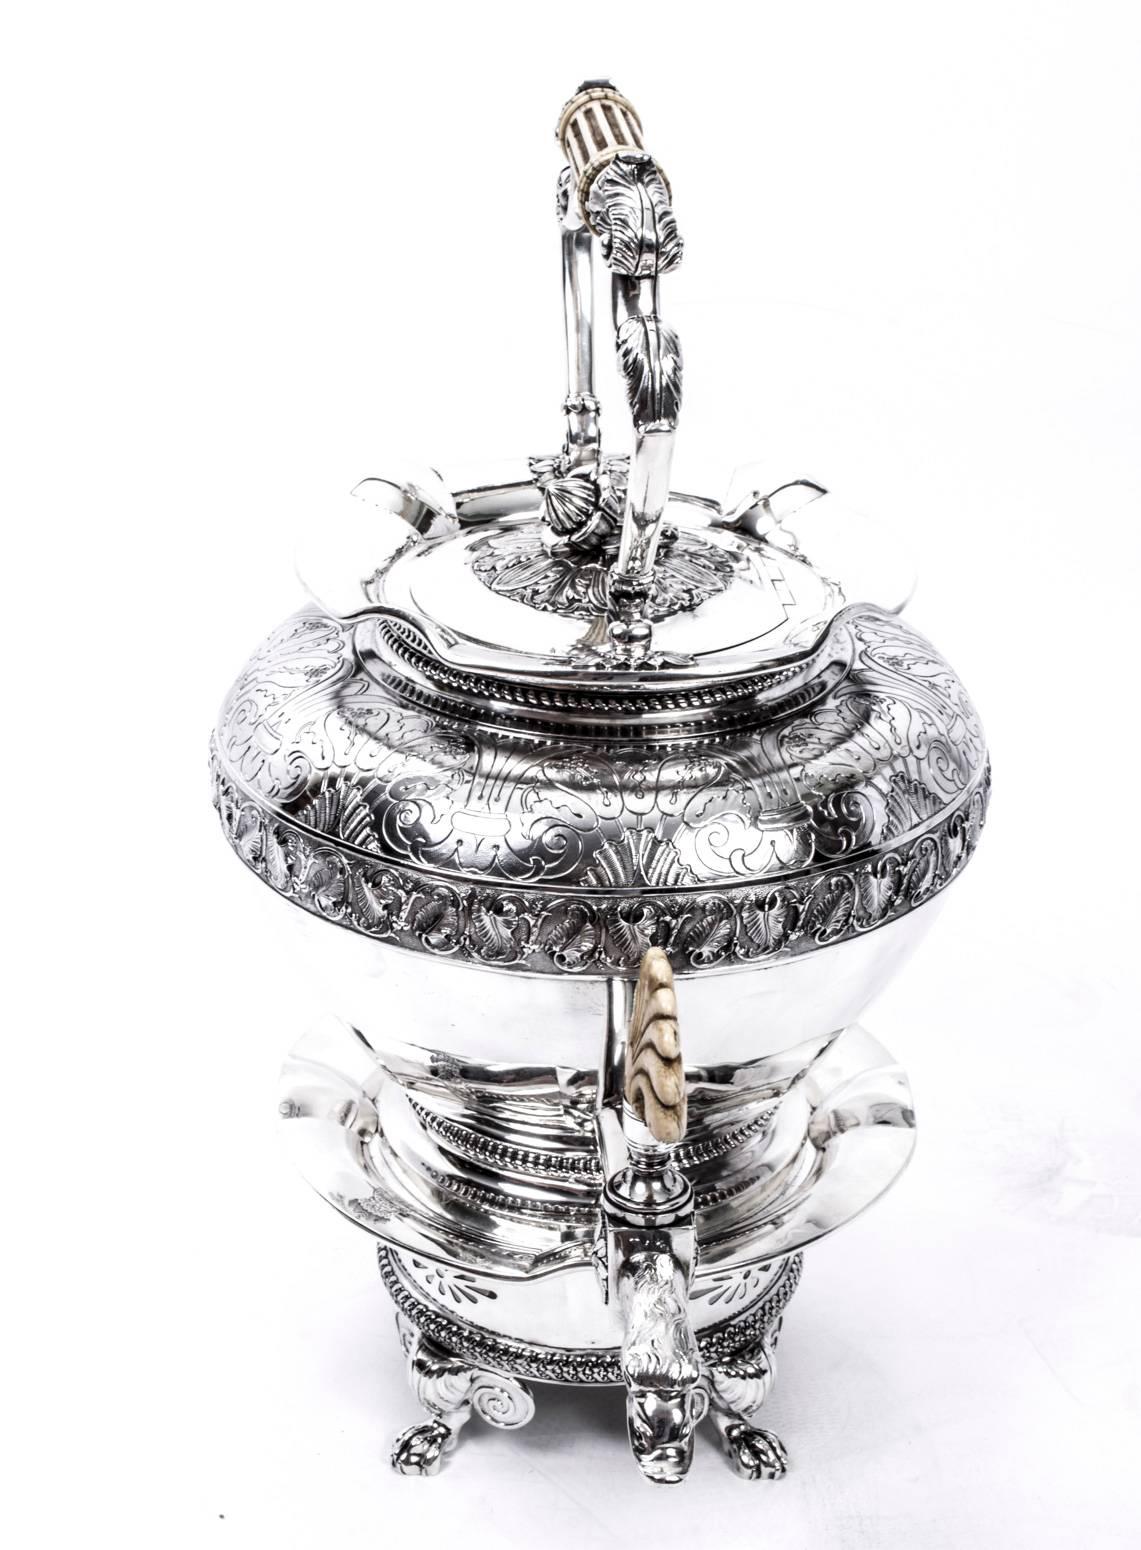 This is a really superb antique sterling silver kettle on stand with hallmarks for London, 1825 and the makers mark of one of the most celebrated silversmiths of all time, John Bridge.

With chased and engraved classical foliate decoration typical